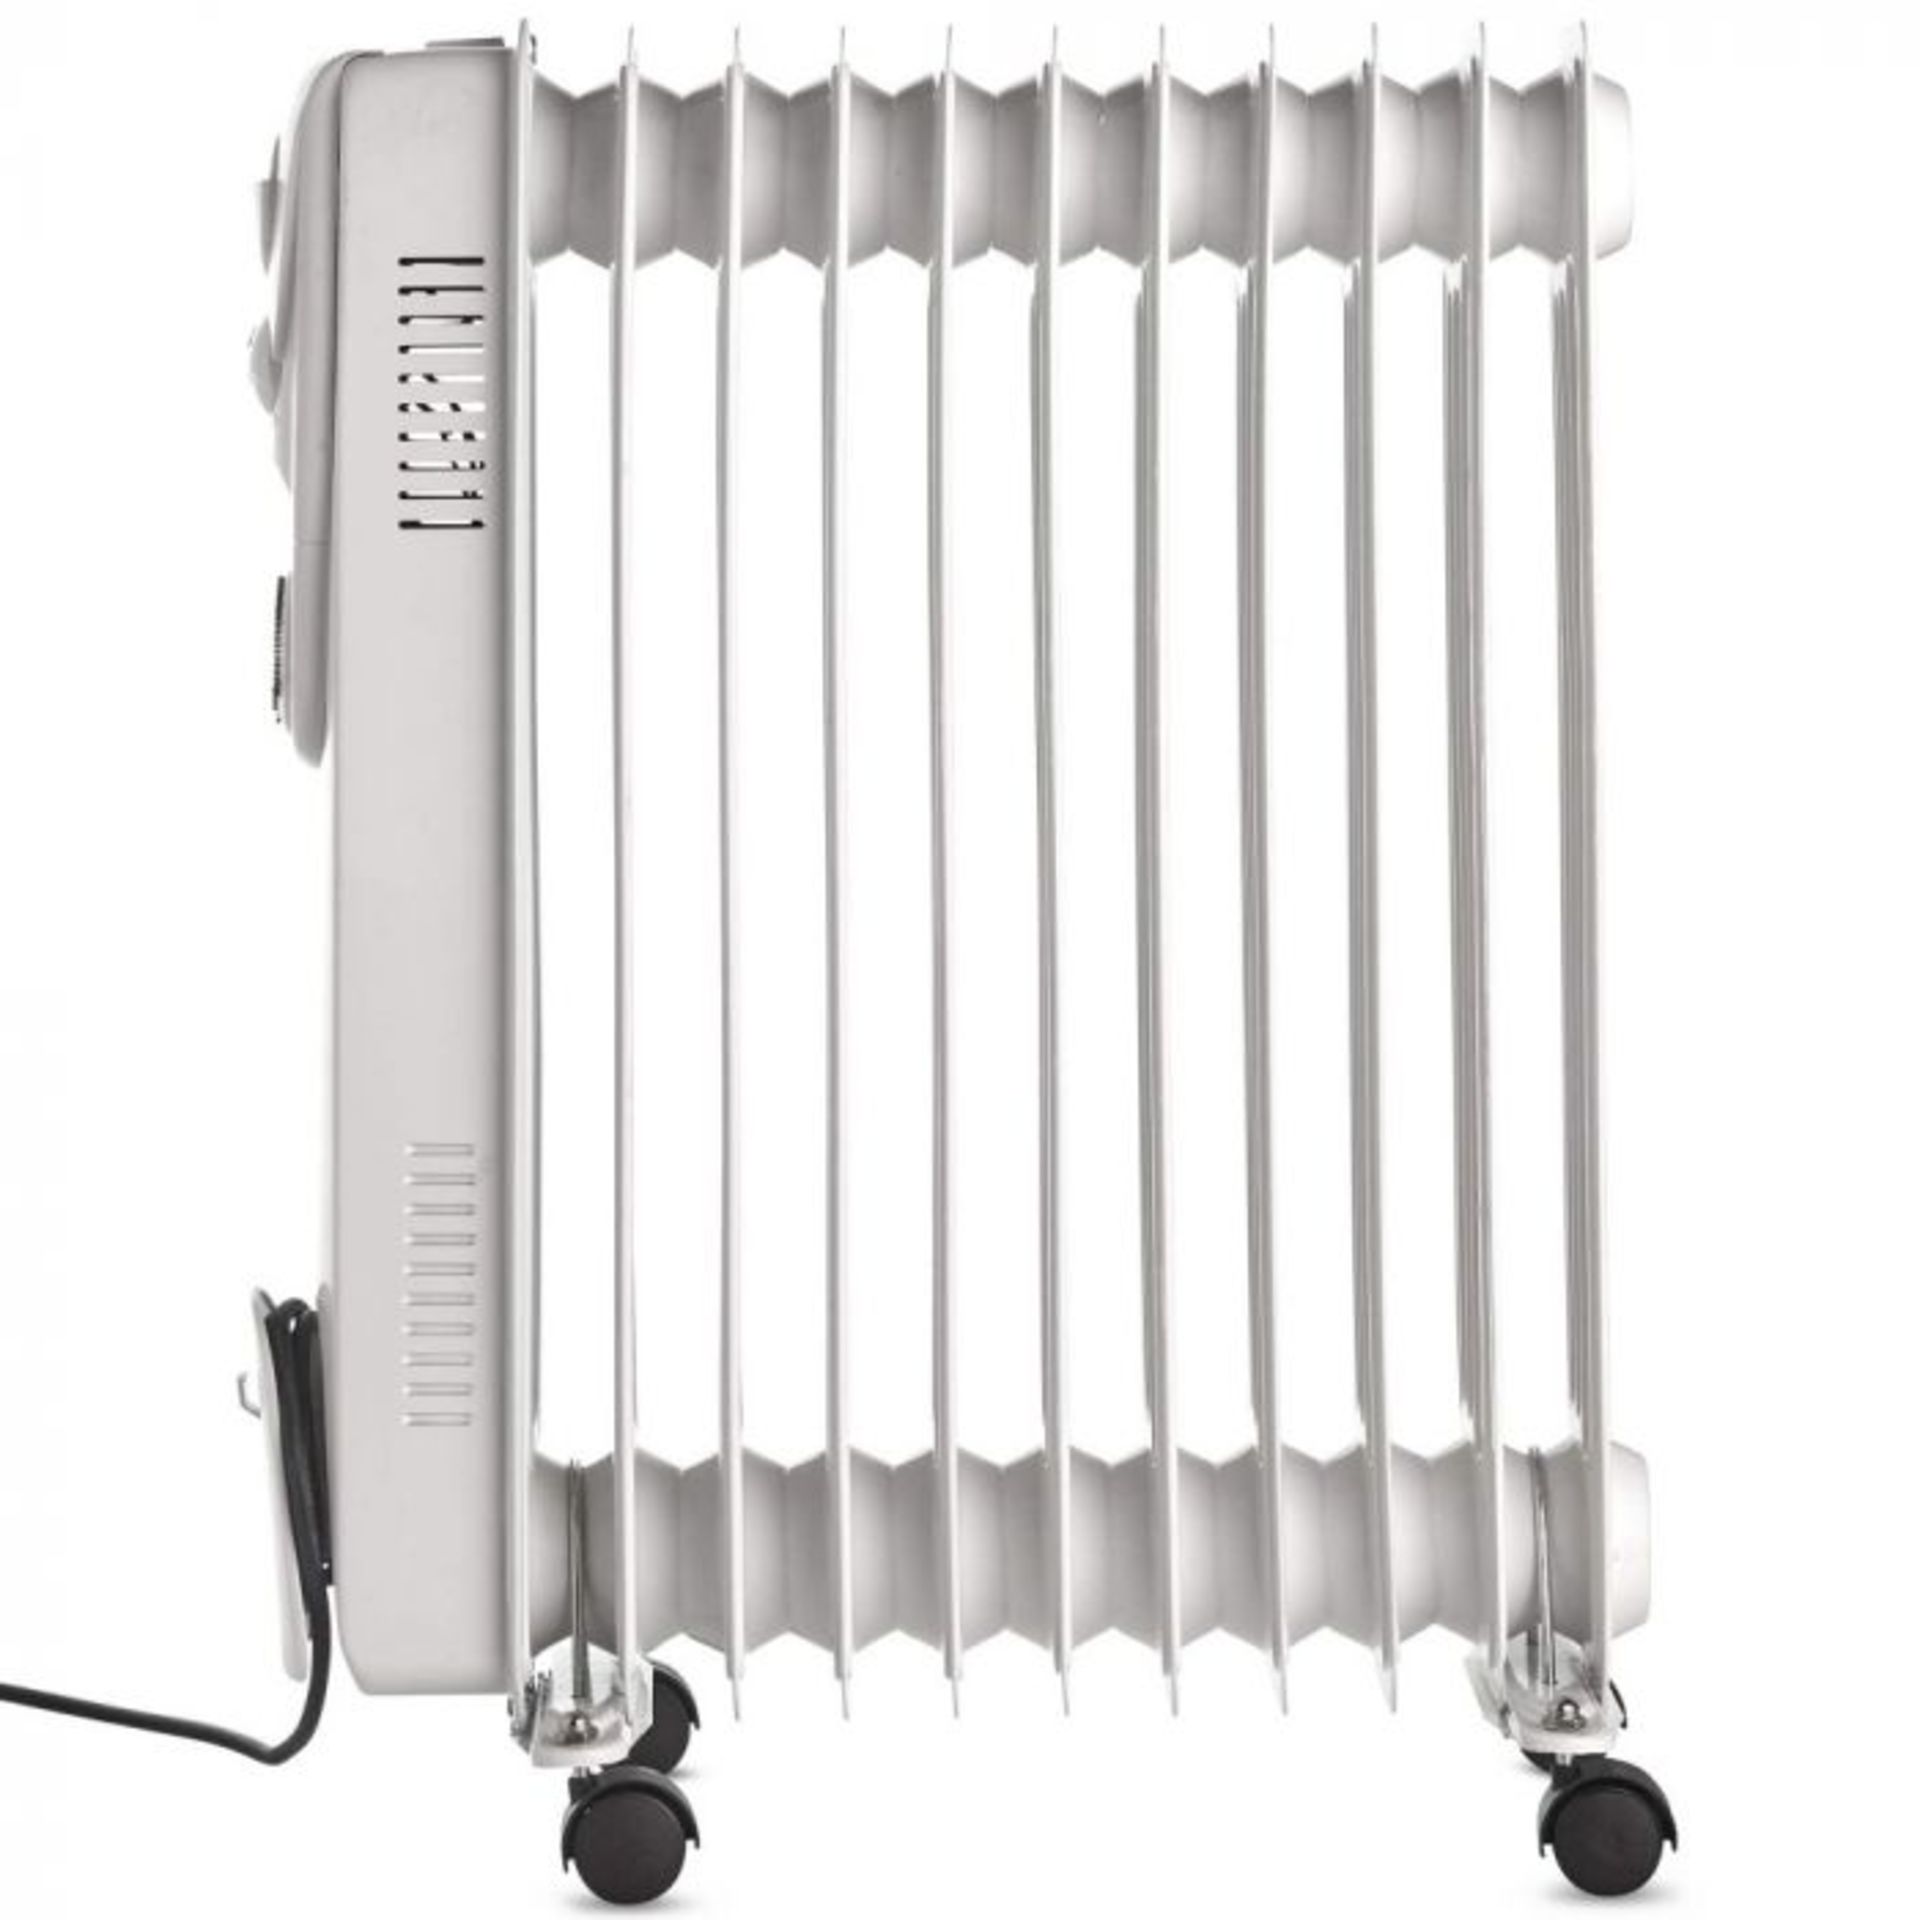 11 Fin 2500W Oil Filled Radiator - White 2500W radiator with 11 oil-filled fins for heating mid to - Bild 4 aus 5